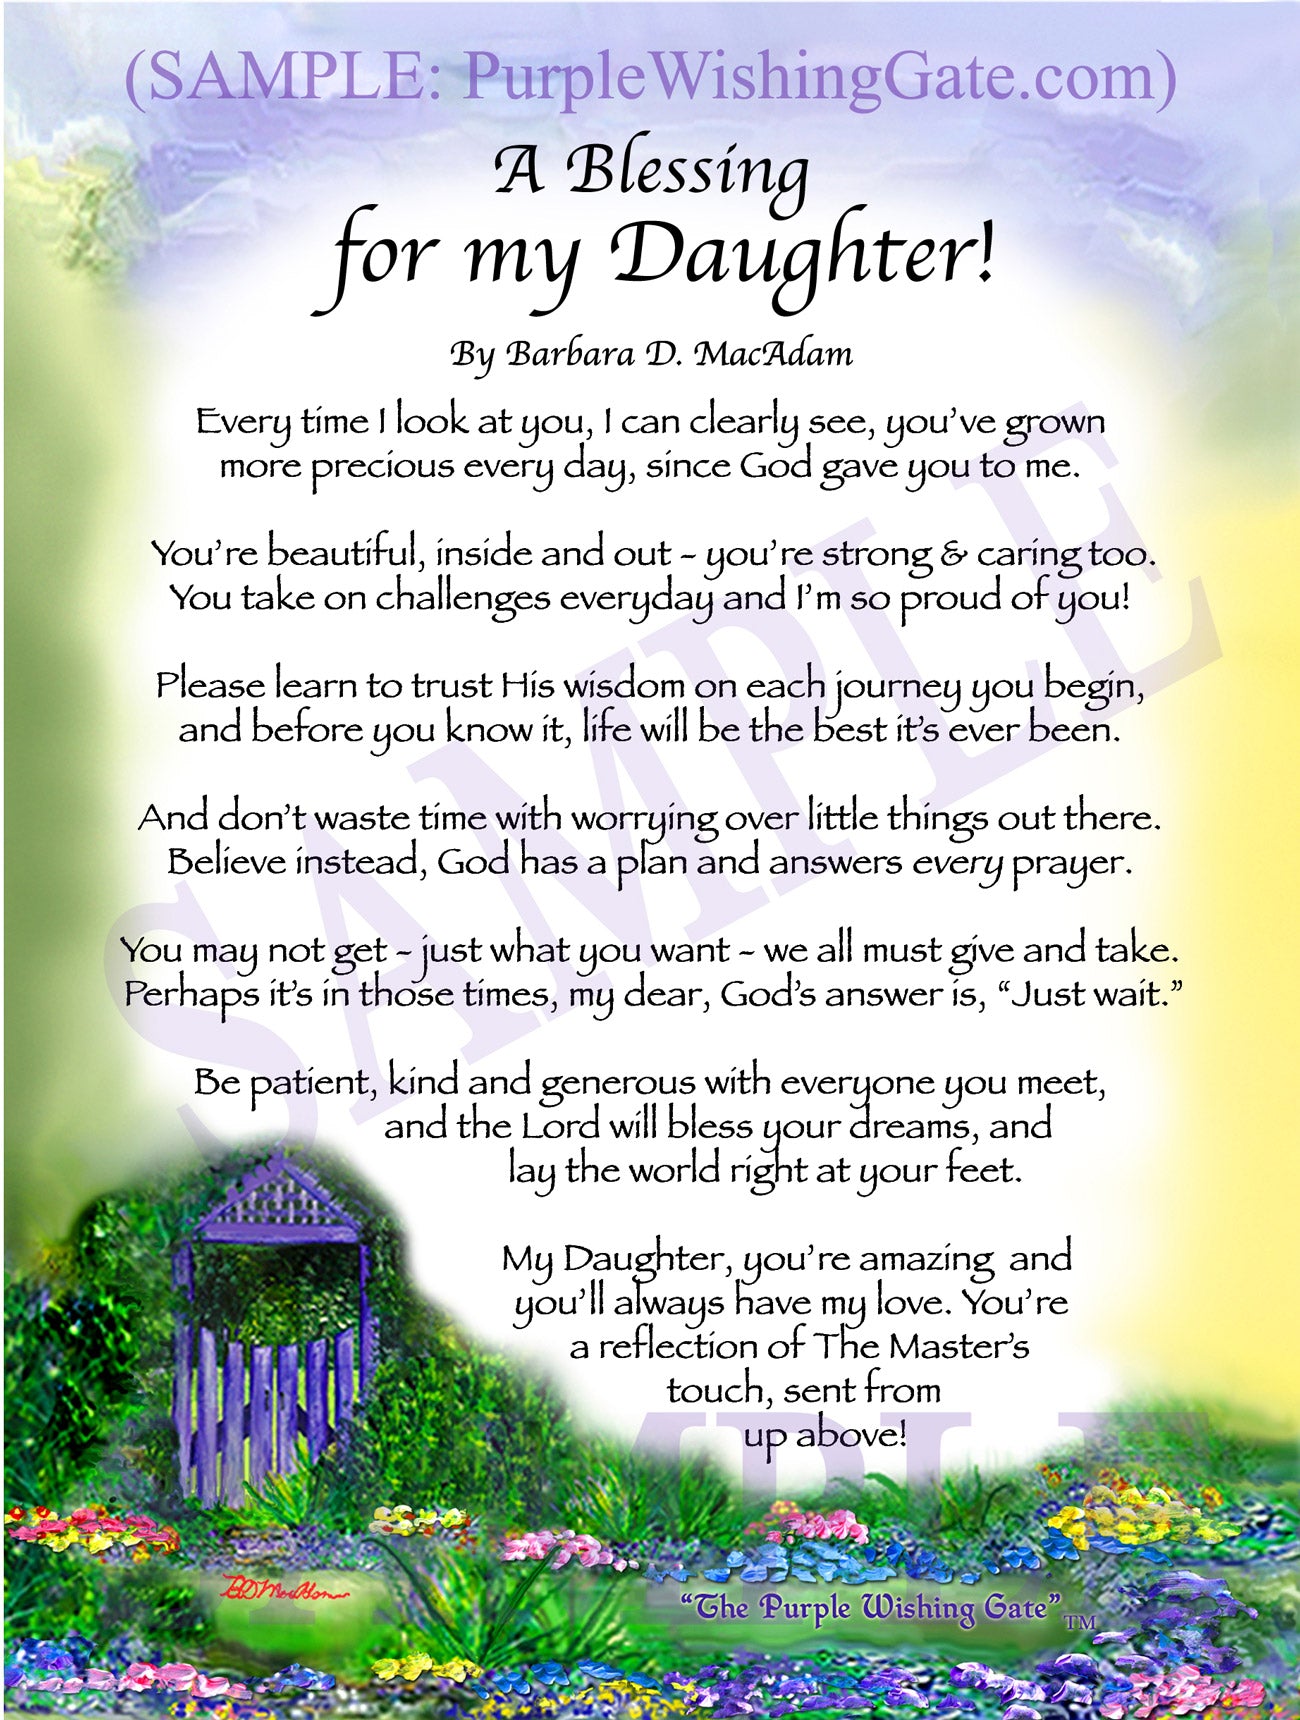 
              
        		A Blessing for my Daughter! (child-adult) - Gifts for Daughter - PurpleWishingGate.com
        		
        	